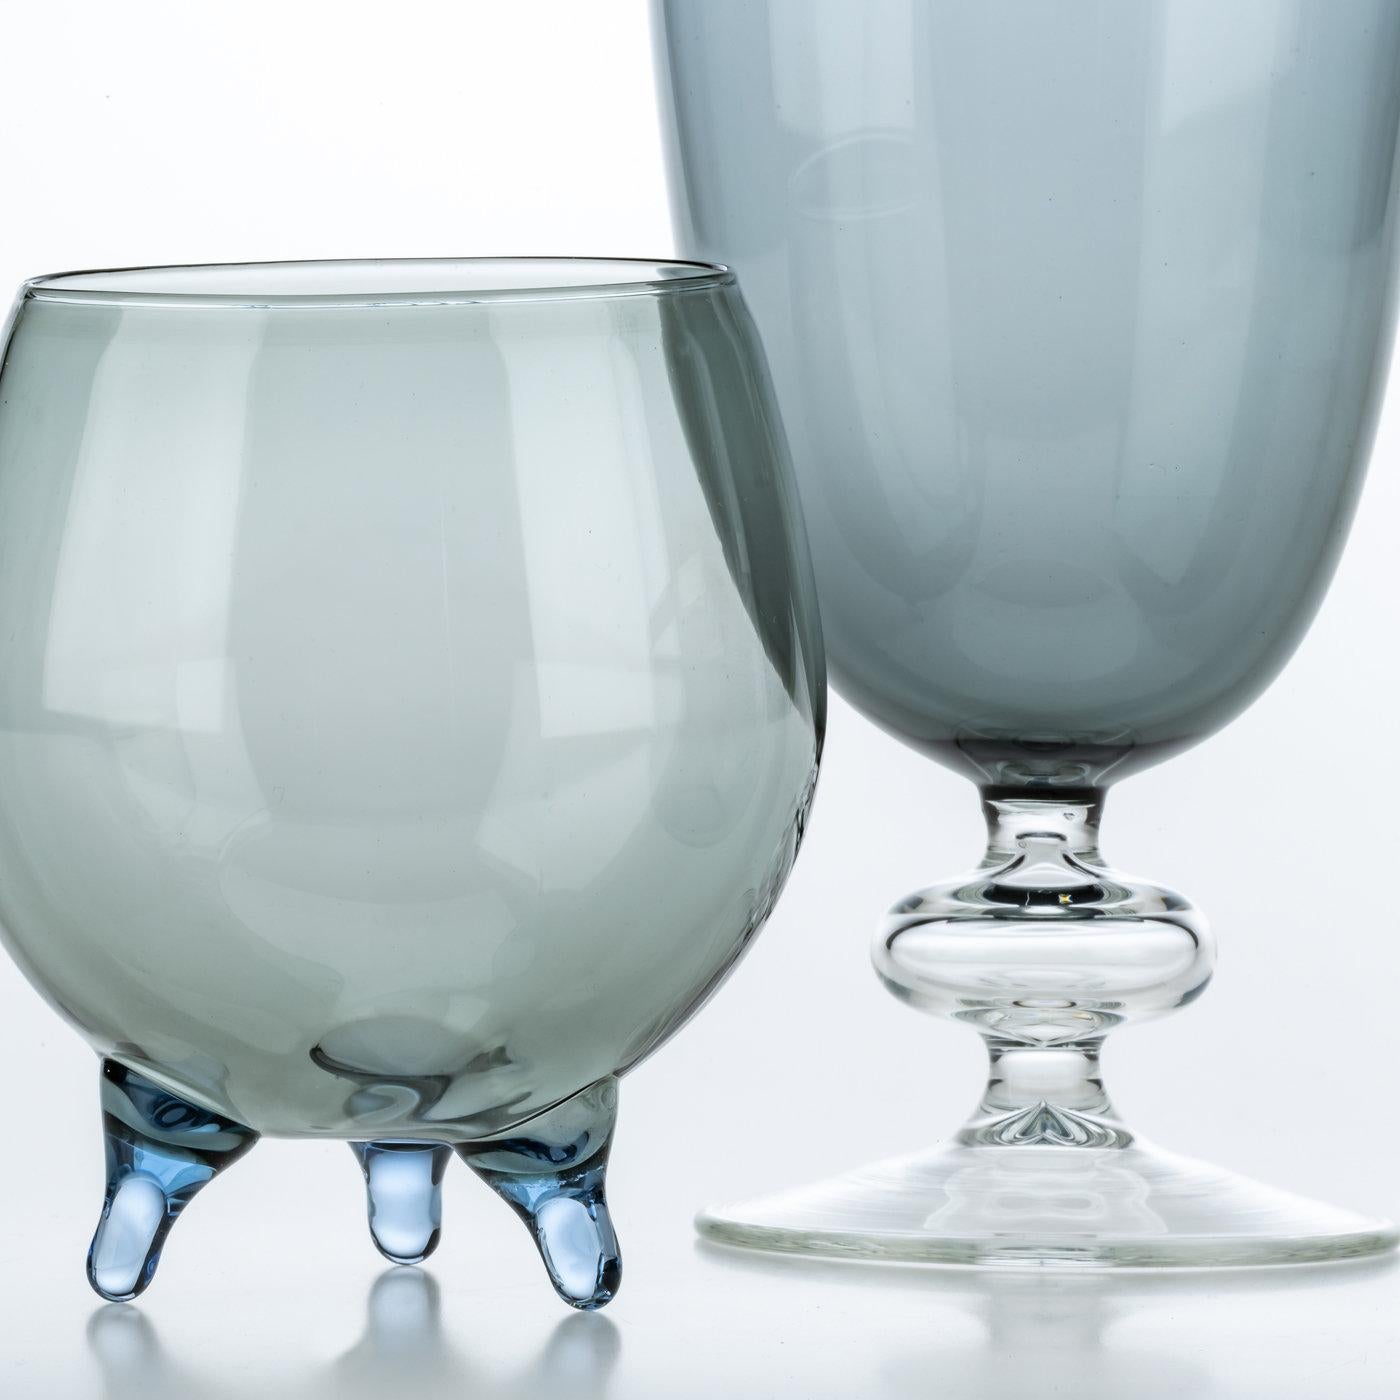 Fashioned of mouth-blown glass, this exceptional wine glass will add a bold look to any classic or contemporary table setting. The set is part of the Firenze Collection of drinkware inspired by the Italian city that was the heart of the Renaissance.